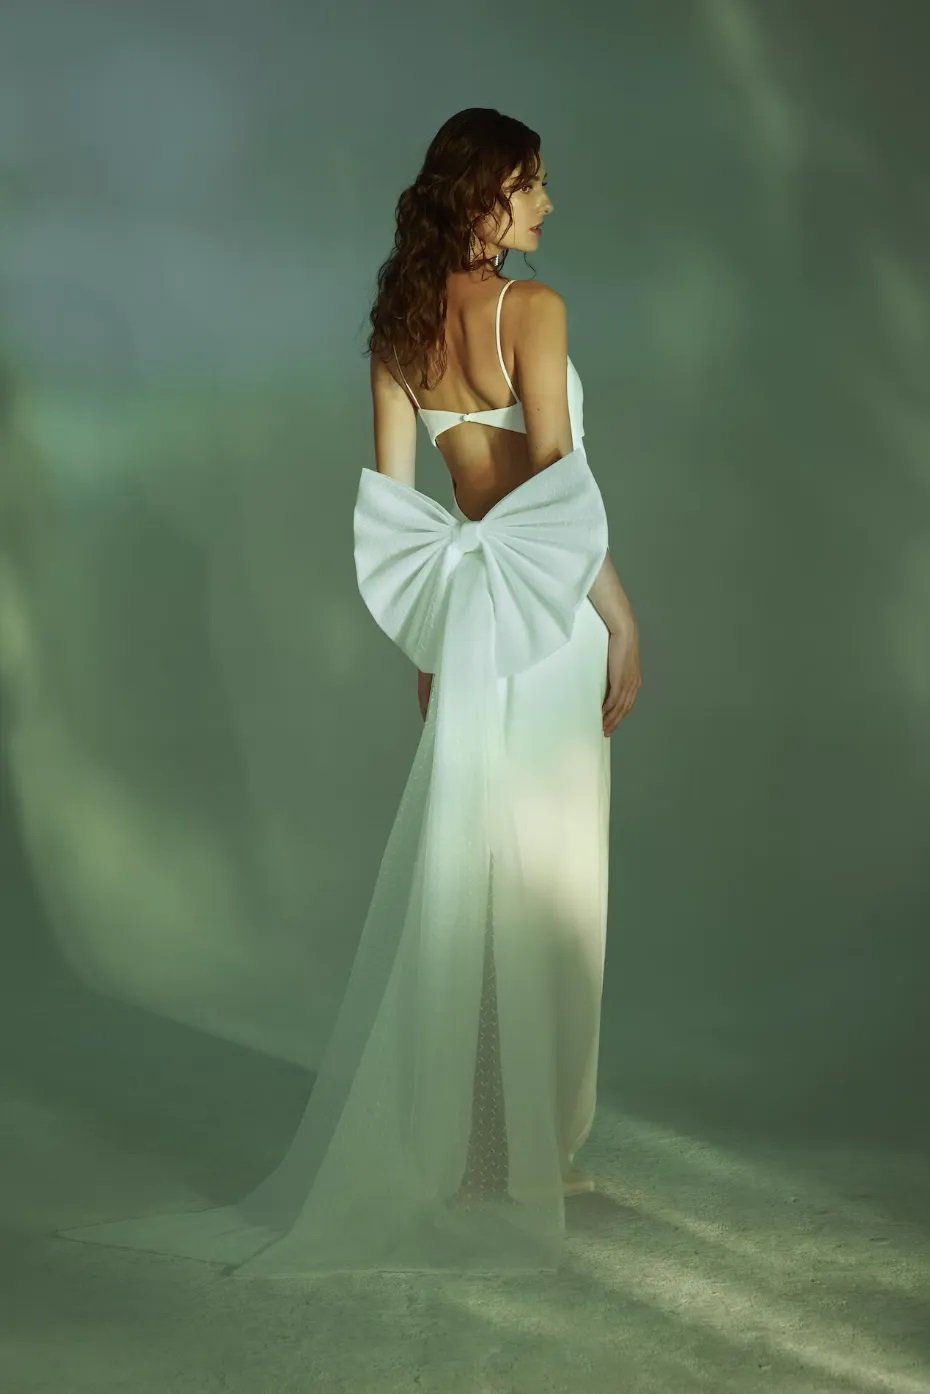 Wedding dress trends for 2024 include 'unexpected details' and